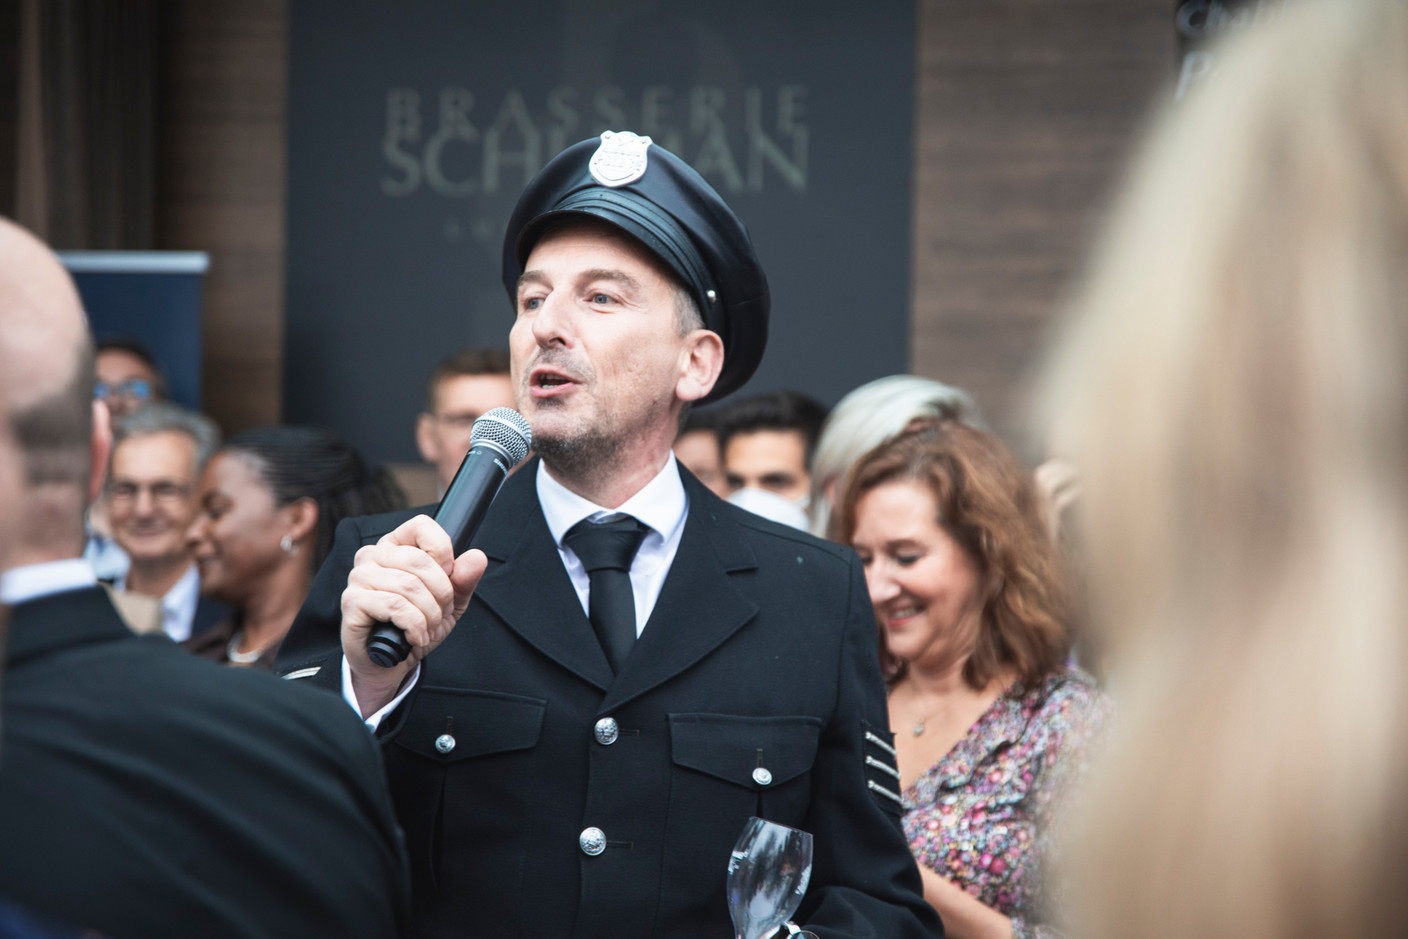 2021: Jim Kent speaks during Delano’s 10th anniversary celebration, where guests dressed up as the job they wanted when they were 10 years old, at the Brasserie Schuman. Maison Moderne archives